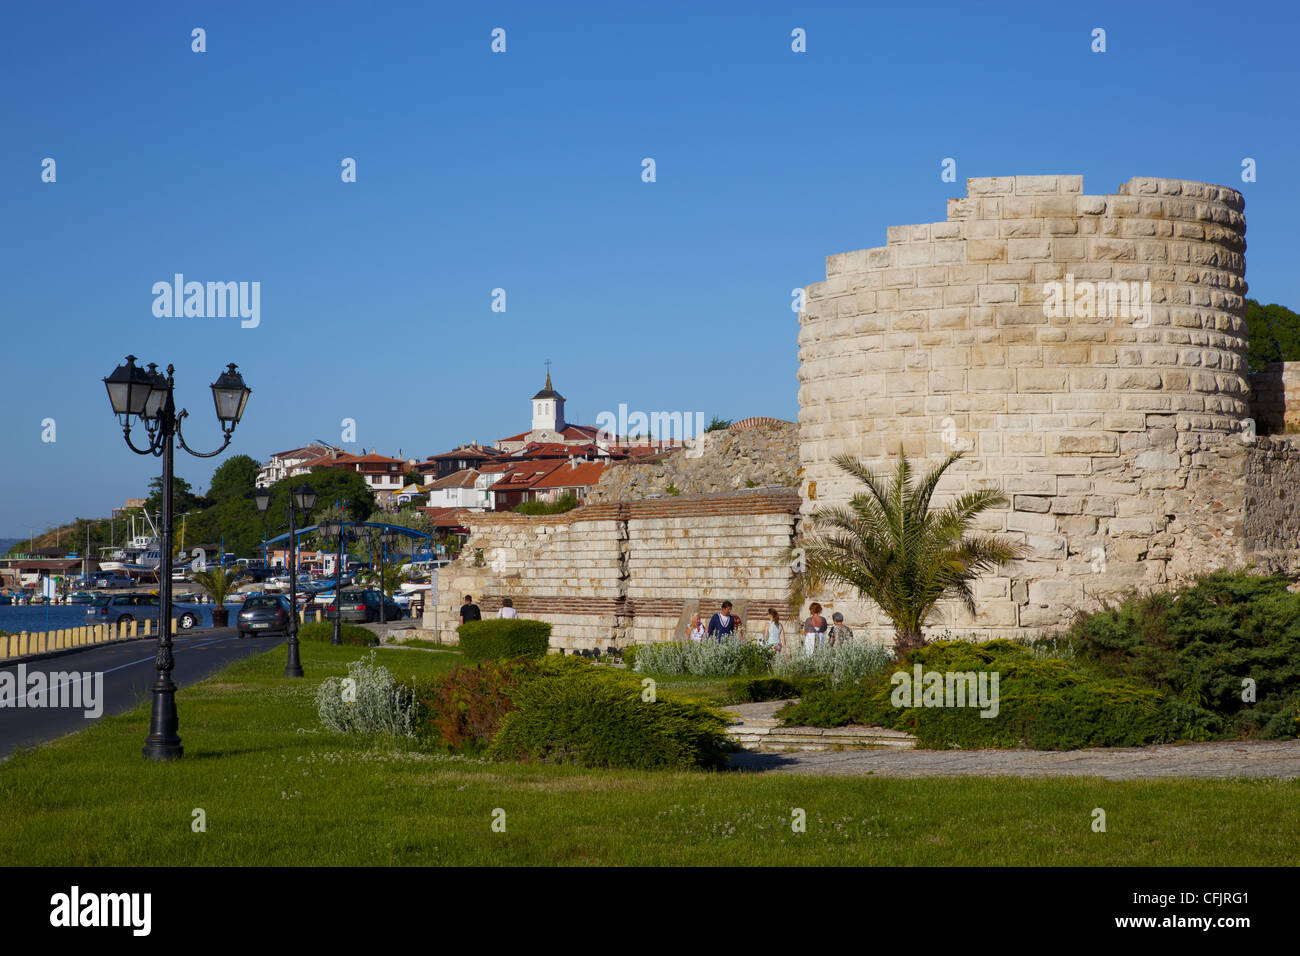 Ramparts and ruins of the medieval fortification walls, Old Town, Nessebar, Black Sea, Bulgaria, Europe Stock Photo